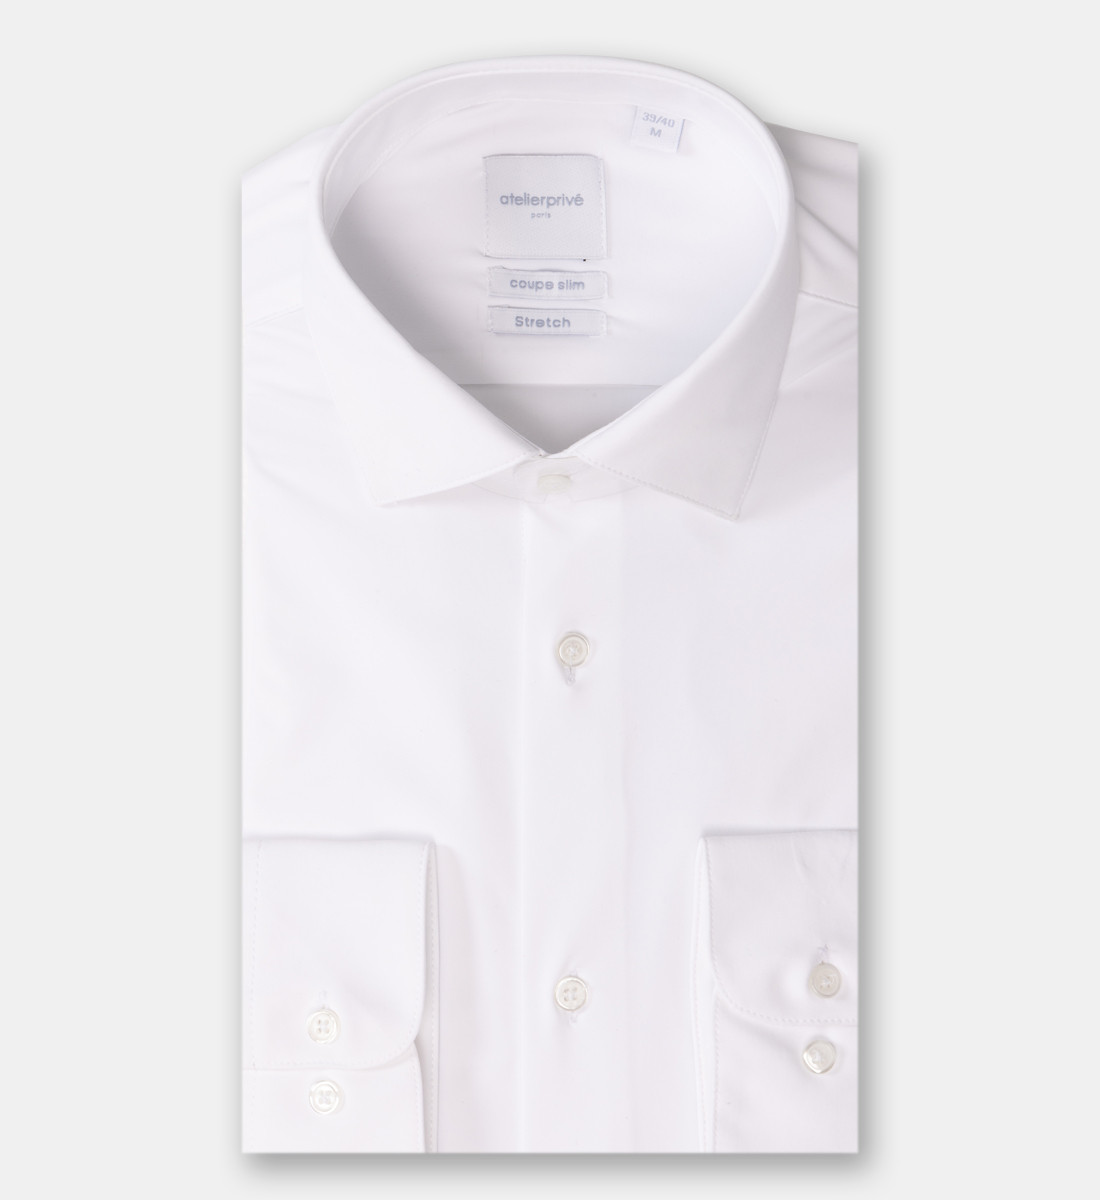 Chemise performance blanche infroissable